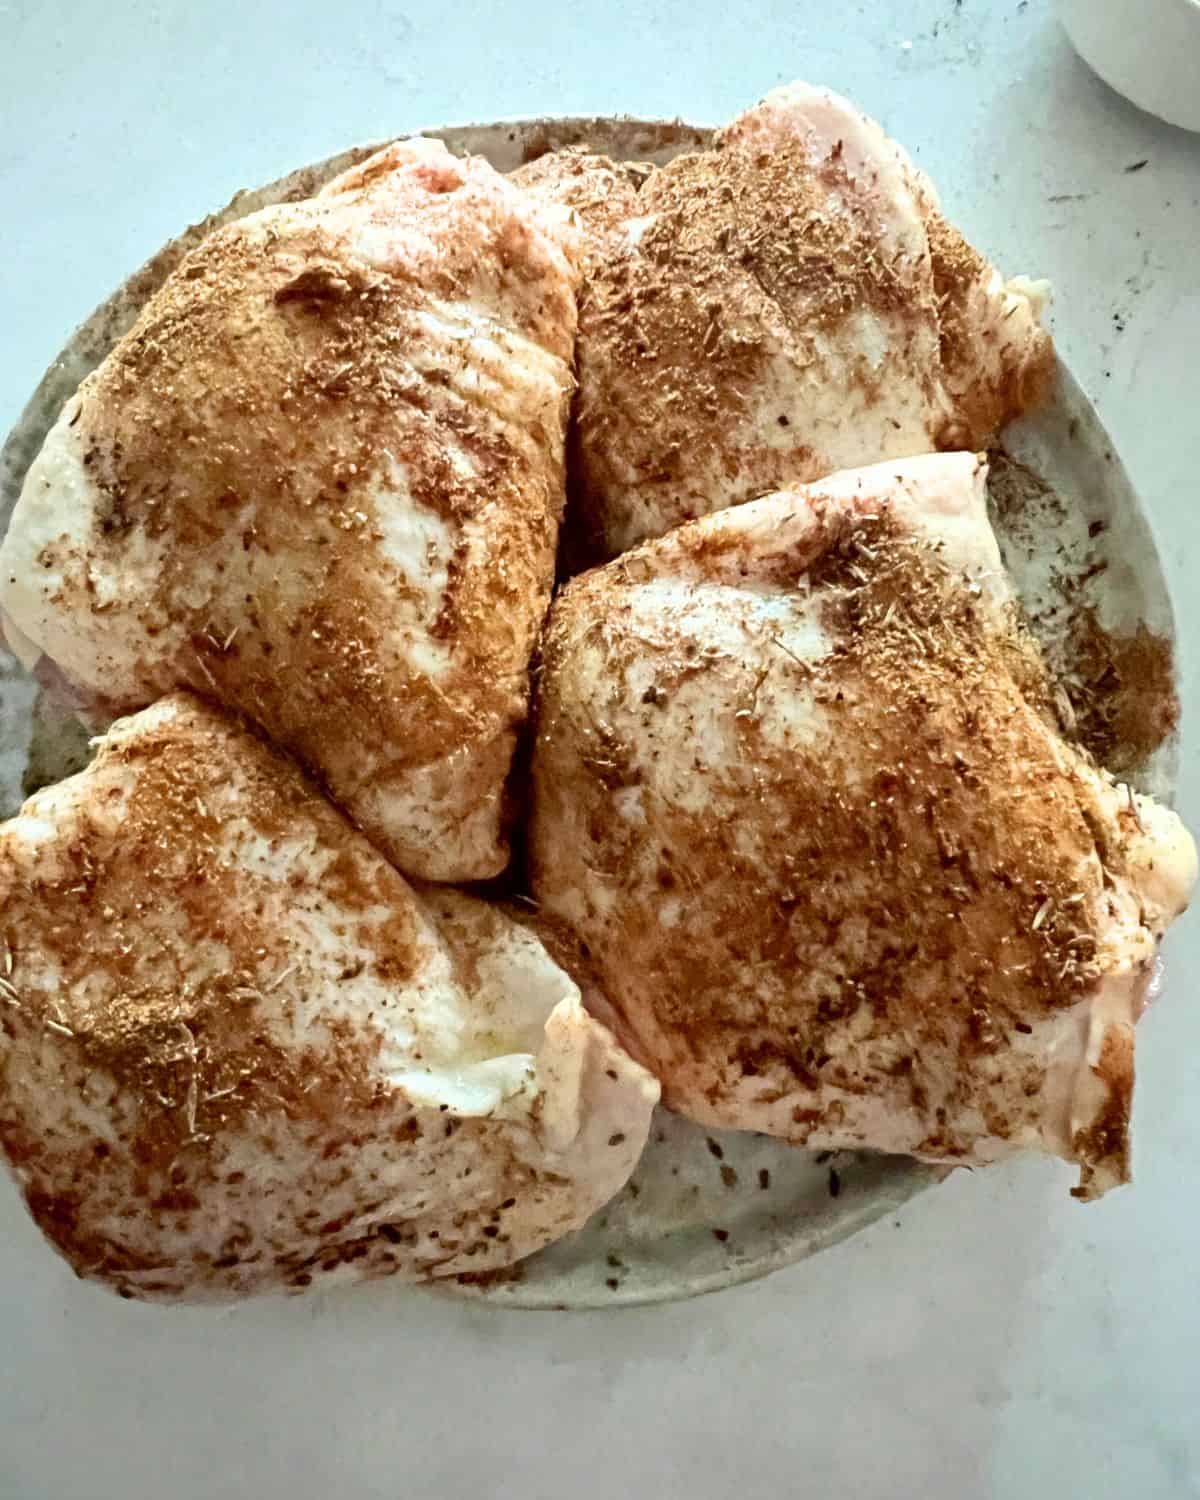 Seasoned chicken thighs rubbed with olive oil. 